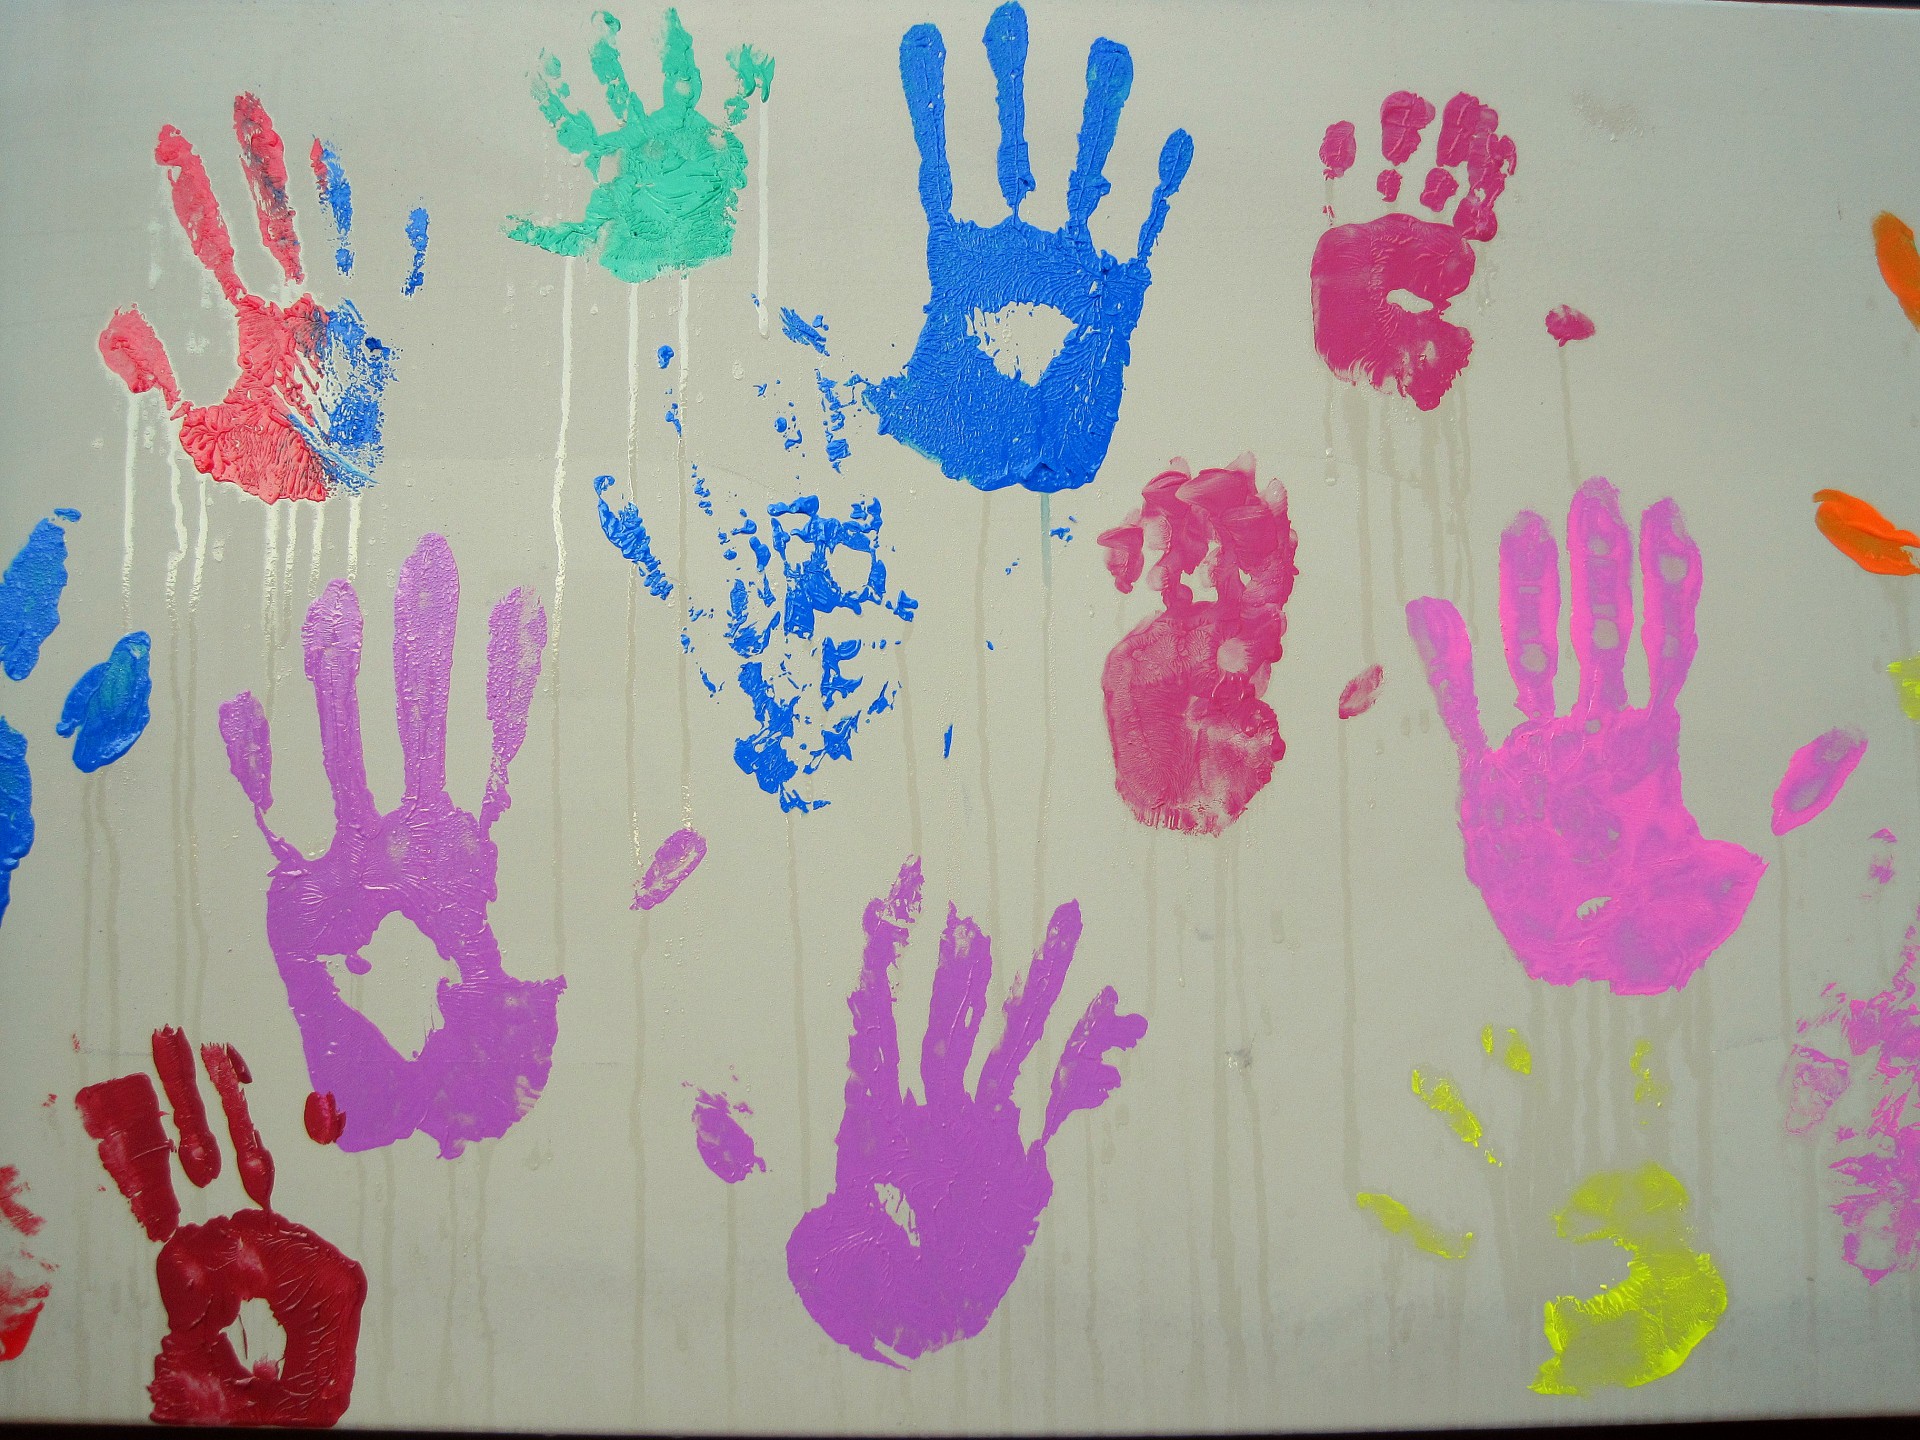 paint-prints-of-youths-hands.jpg